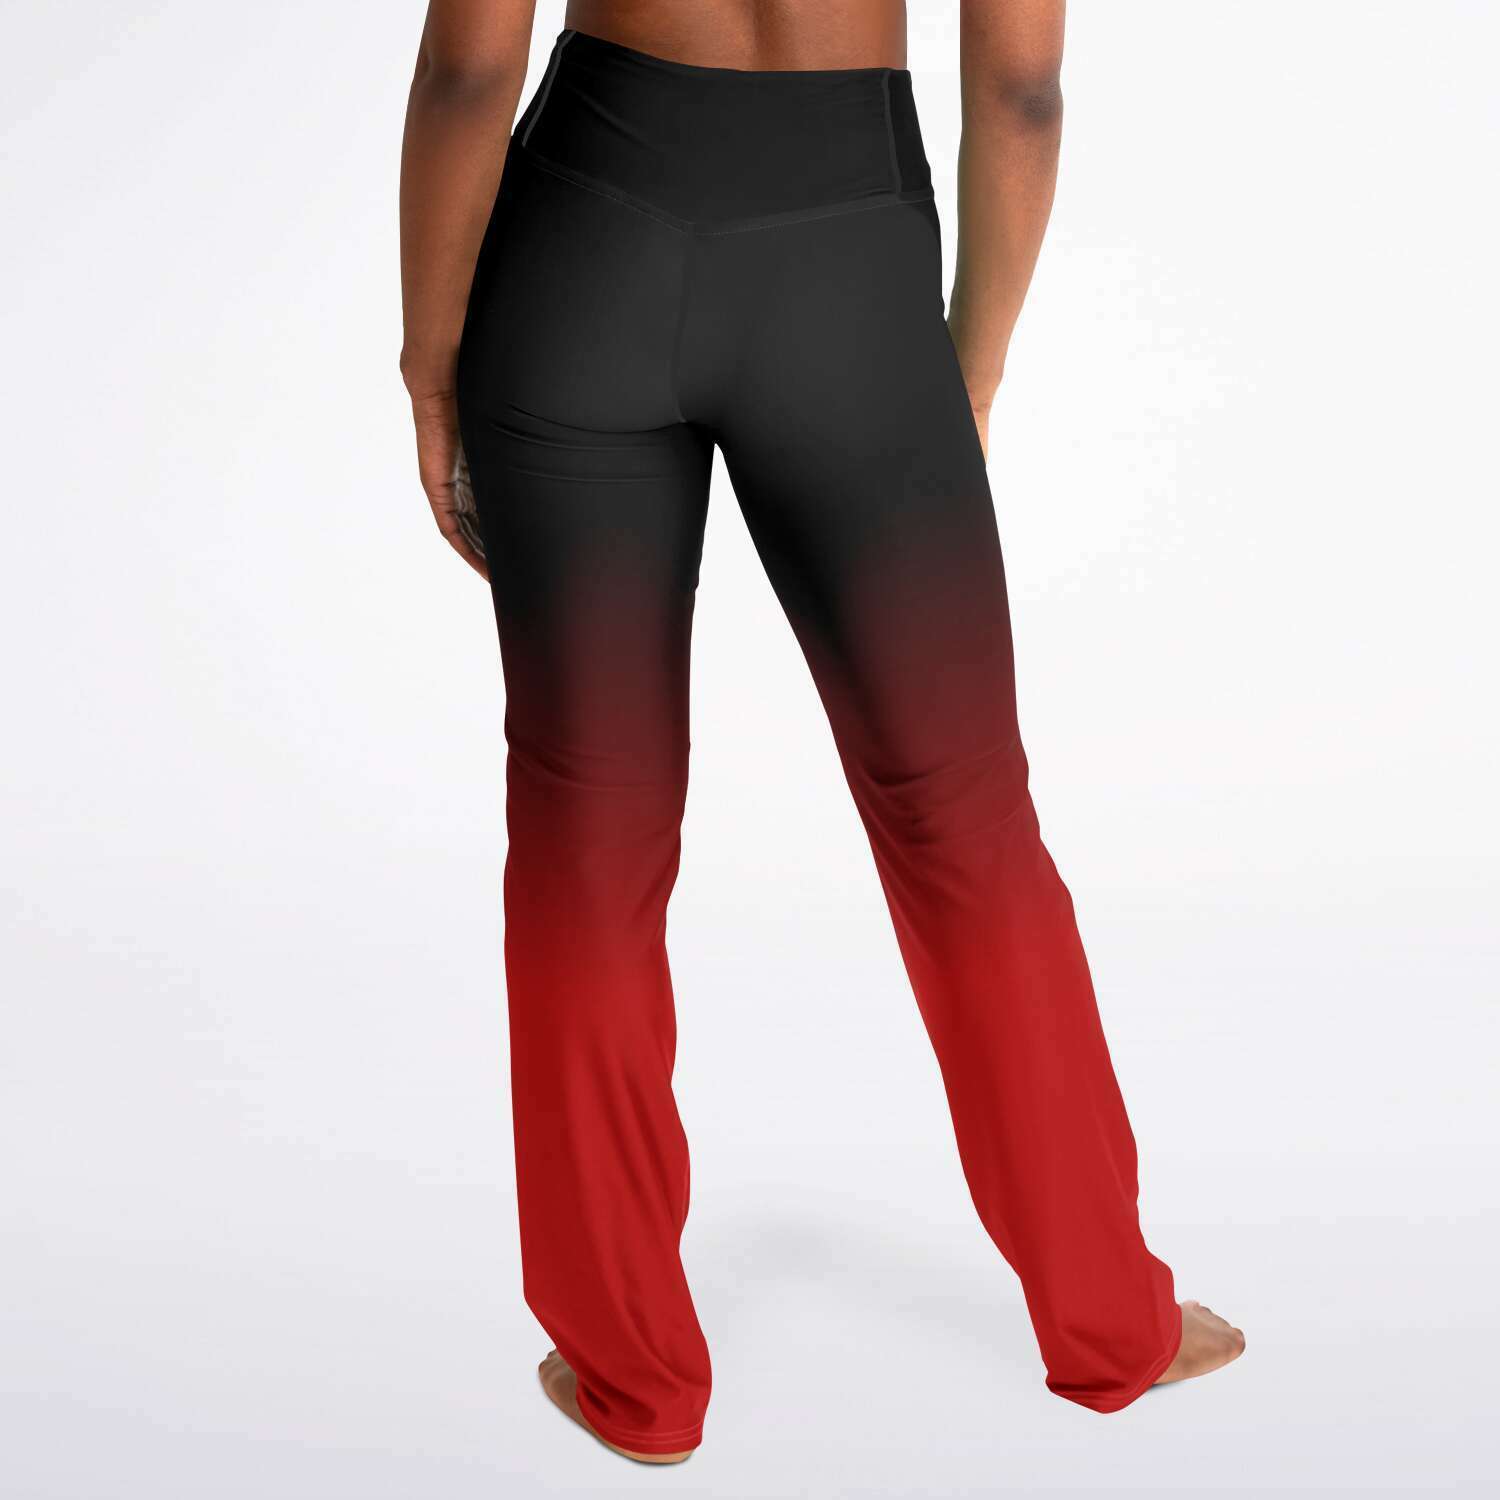 Black Red Ombre Flared Leggings, Tie Dye Printed High Waisted Yoga Des –  Starcove Fashion